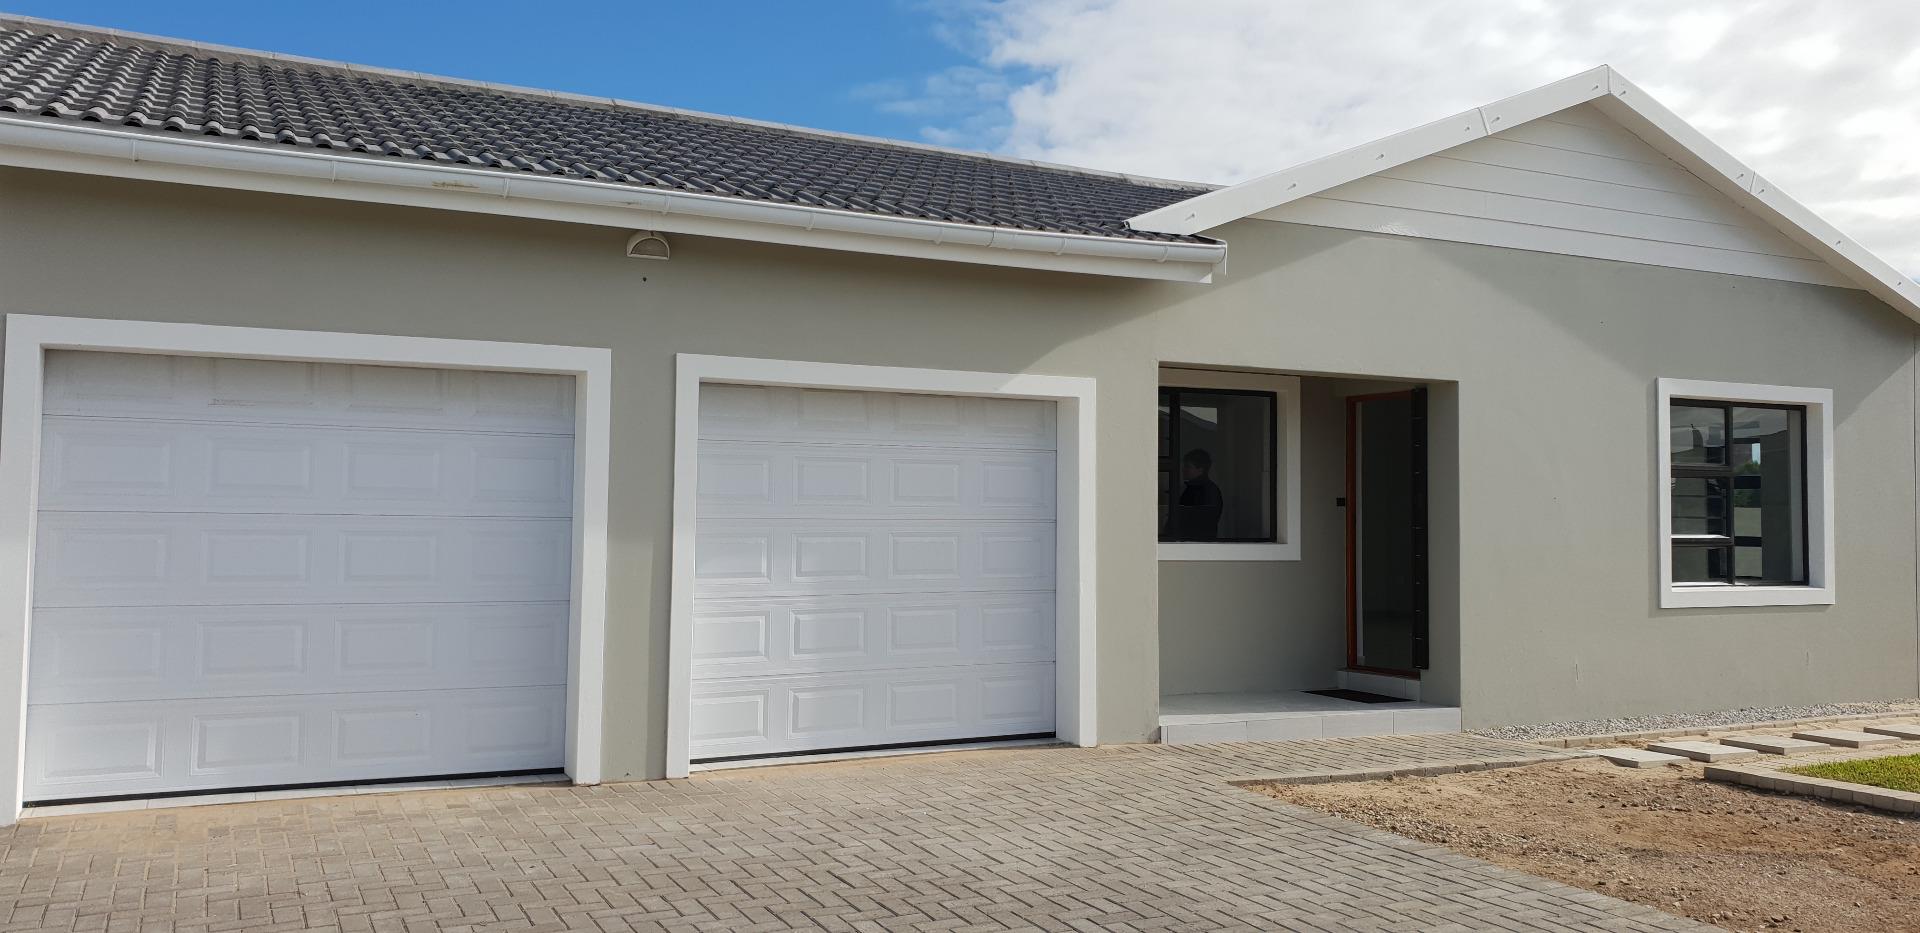 2 Bedroom House for Sale - Eastern Cape